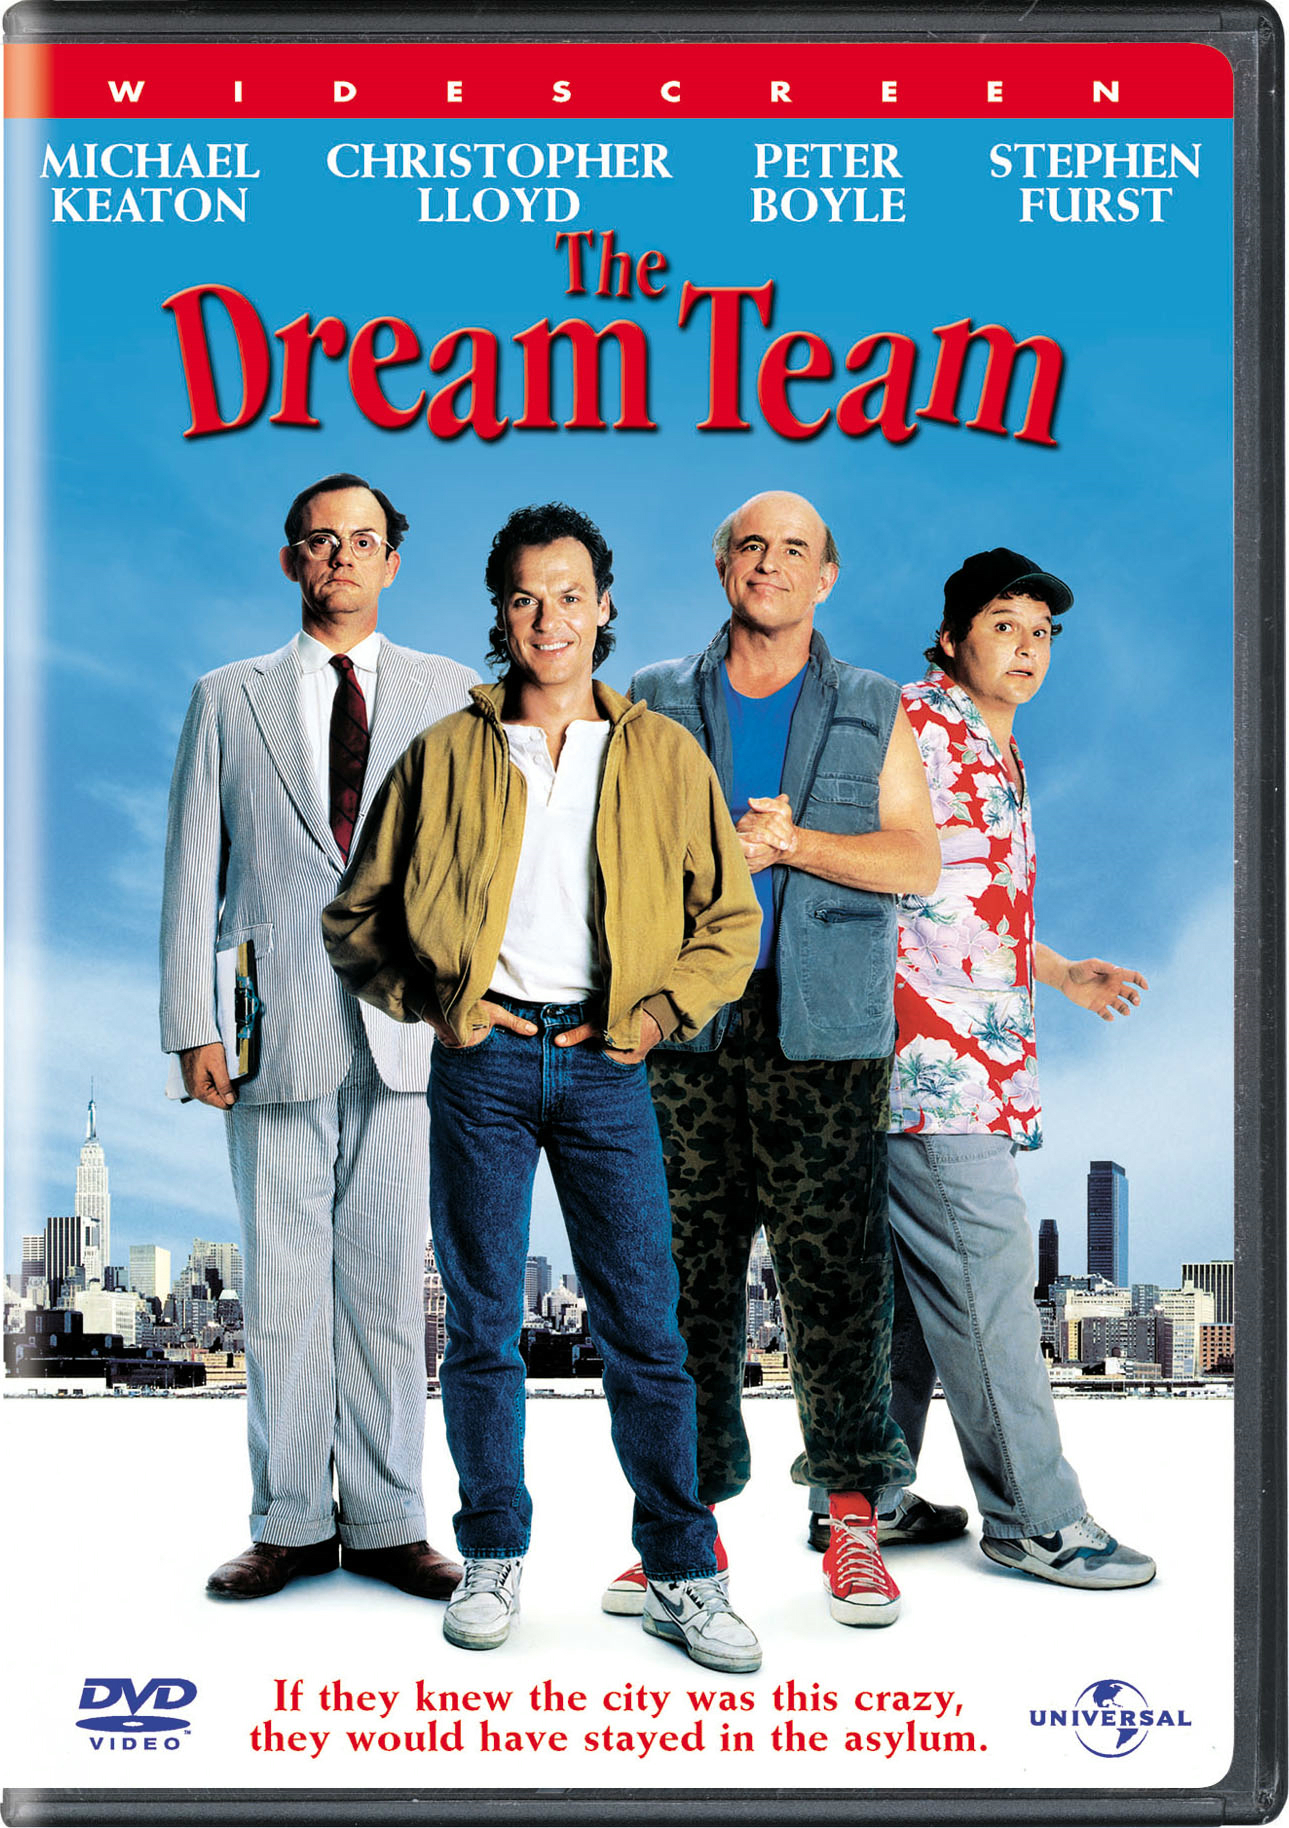 The Dream Team - DVD [ 1989 ]  - Comedy Movies On DVD - Movies On GRUV